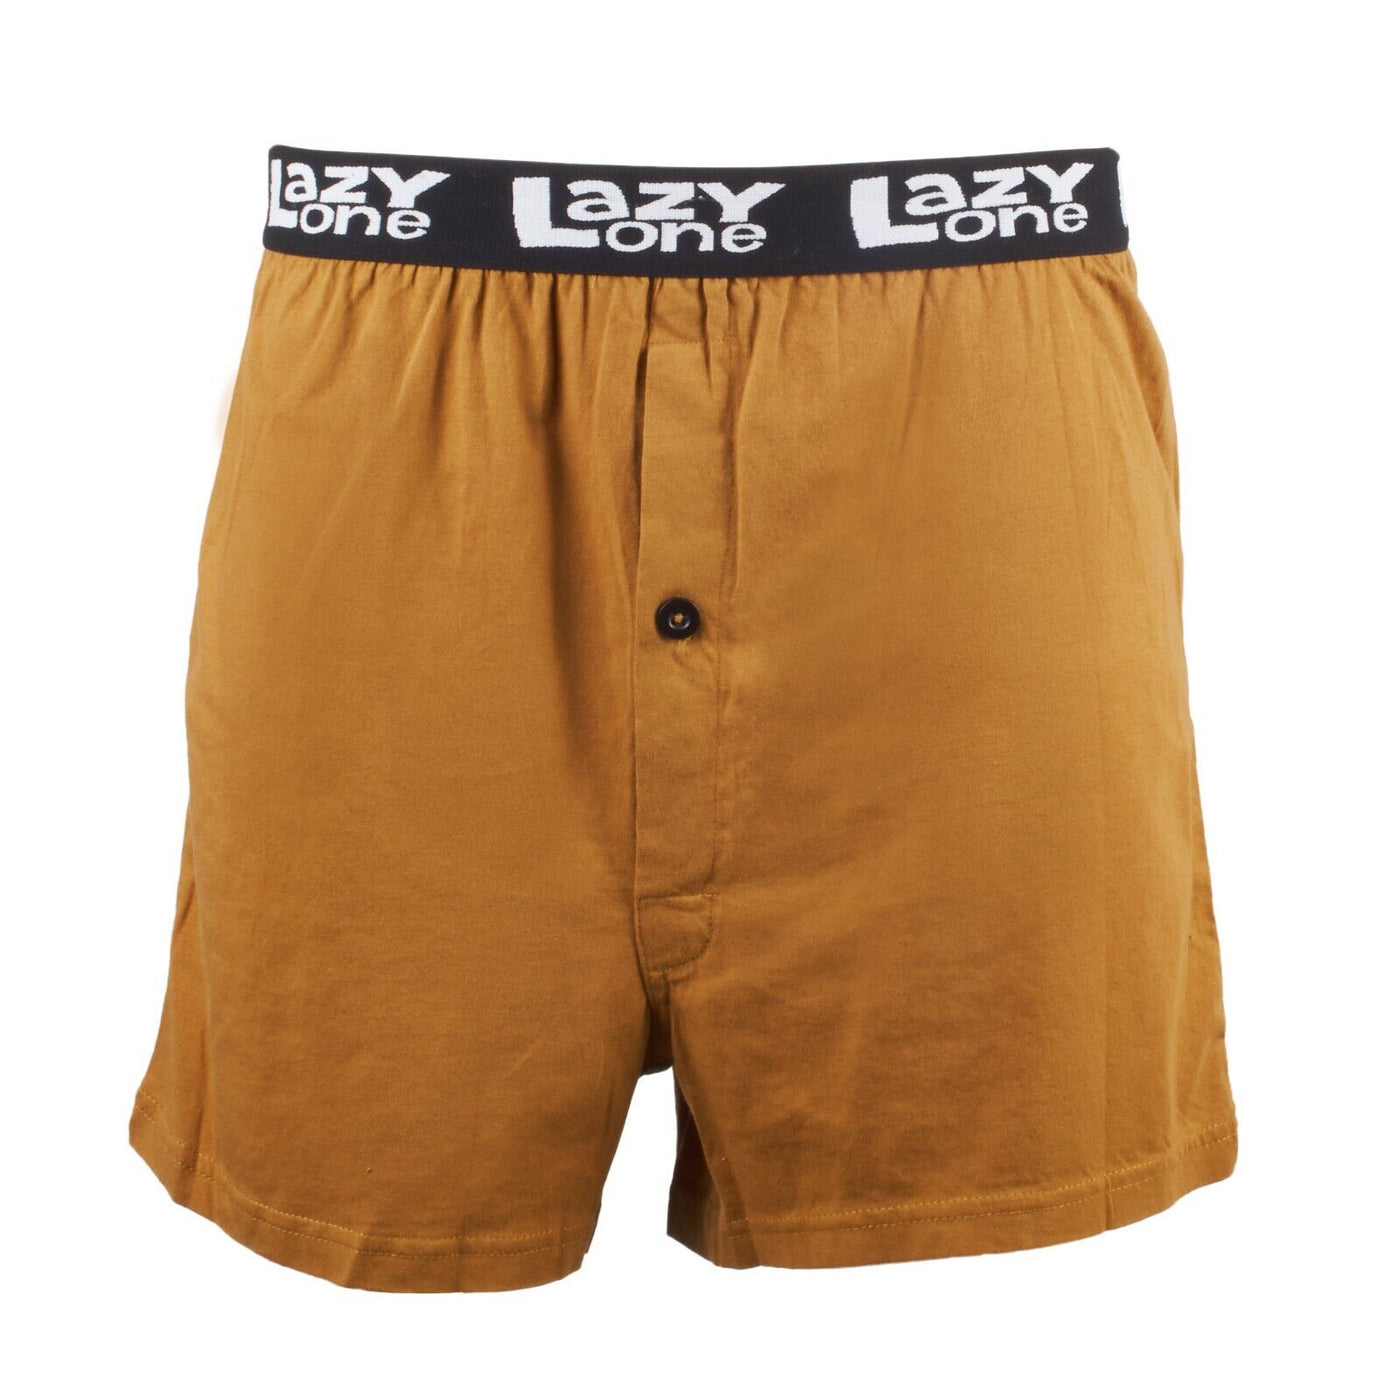 Lazy One Men's Don't Squat With Our Spurs On Boxers